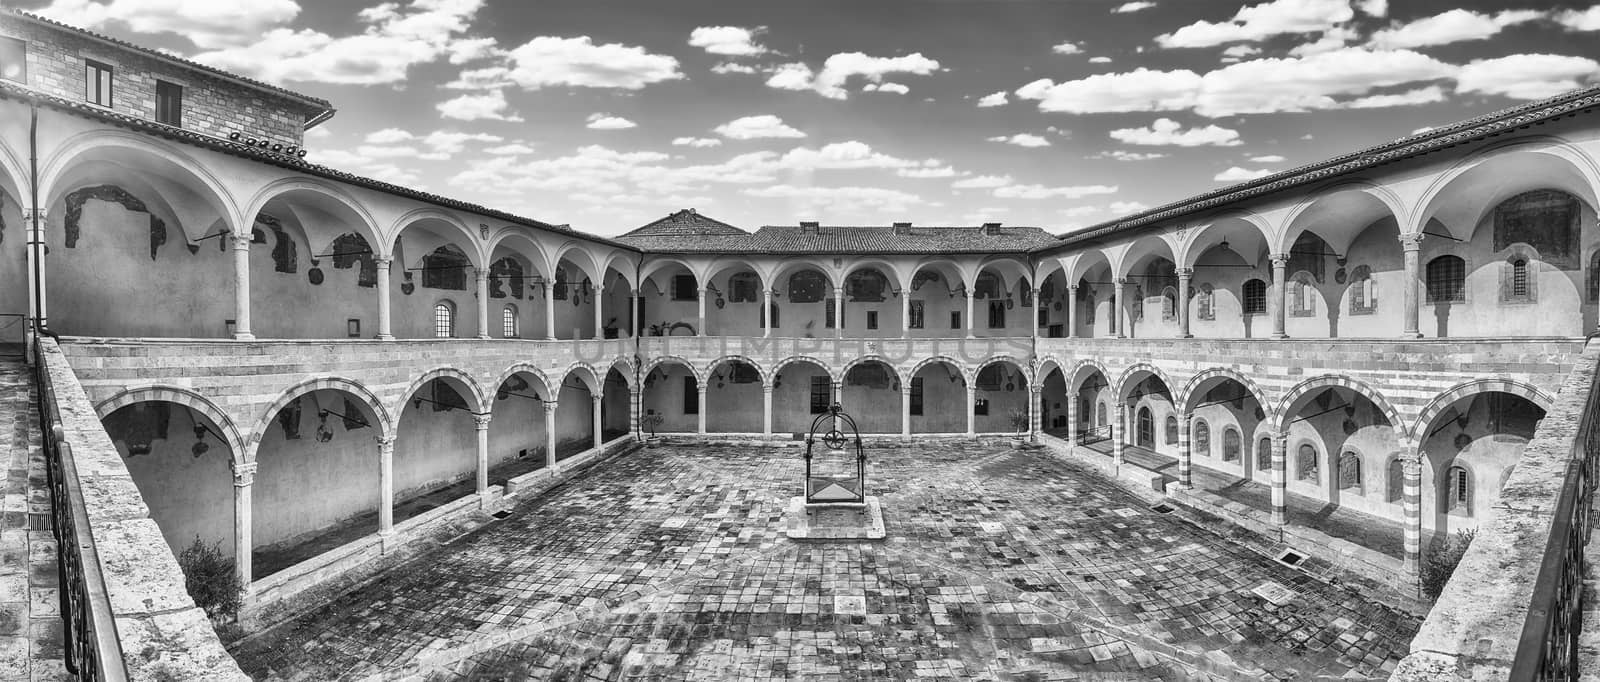 Courtyard of the friary of Saint Francis Church, Assisi, Italy by marcorubino